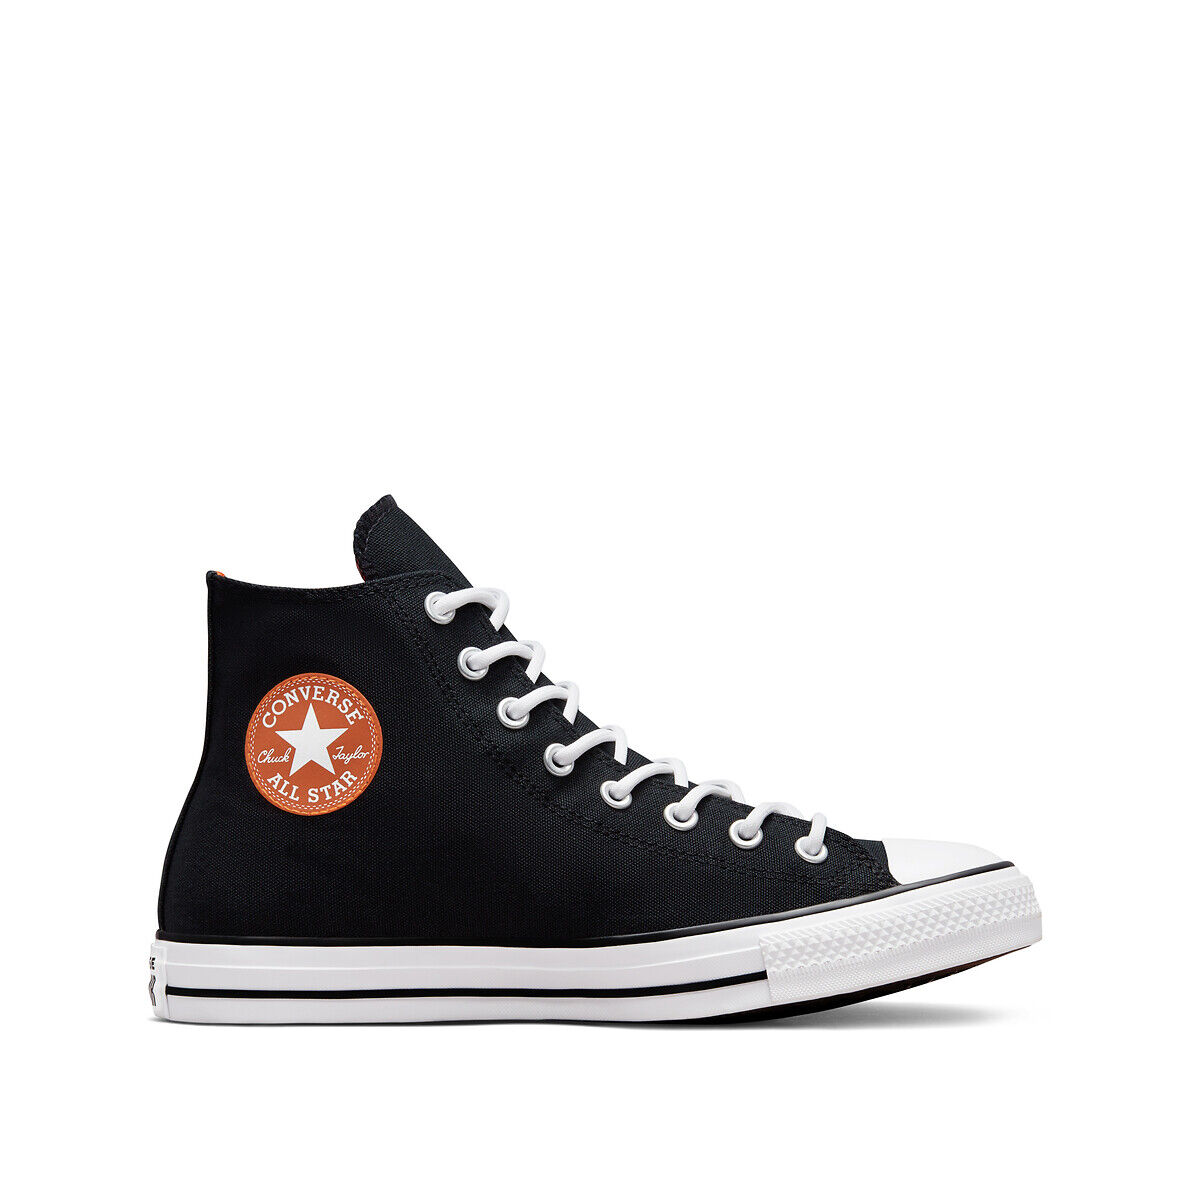 CONVERSE Sneakers Chuck Taylor All Star Cold Fusion SCHWARZ